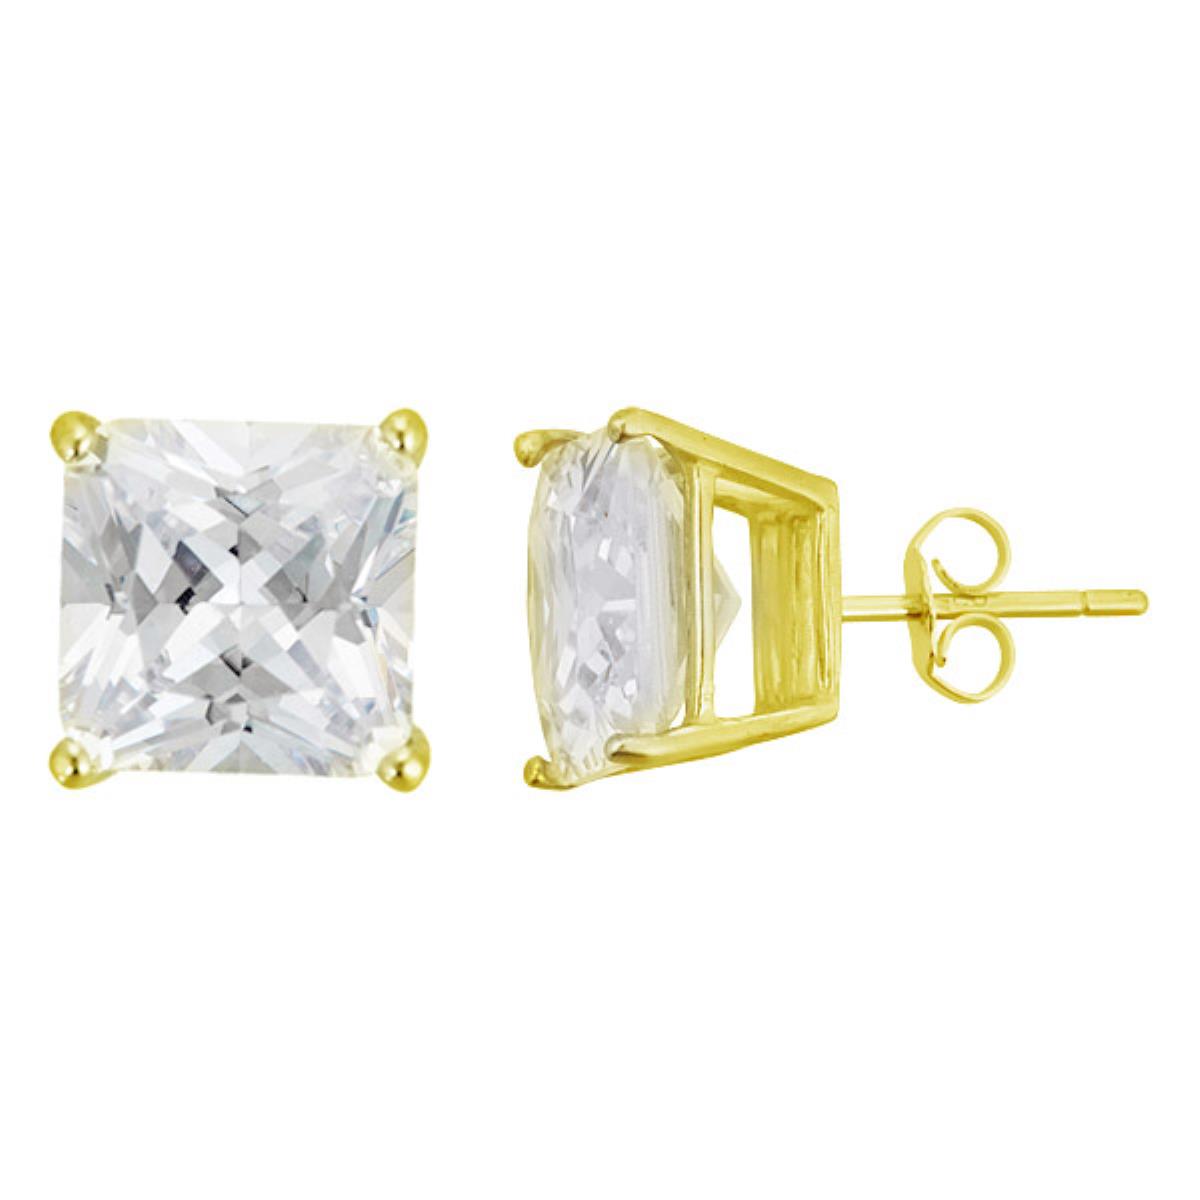 Sterling Silver Yellow 8x8mm AAA Square Solitaire Stud Earring